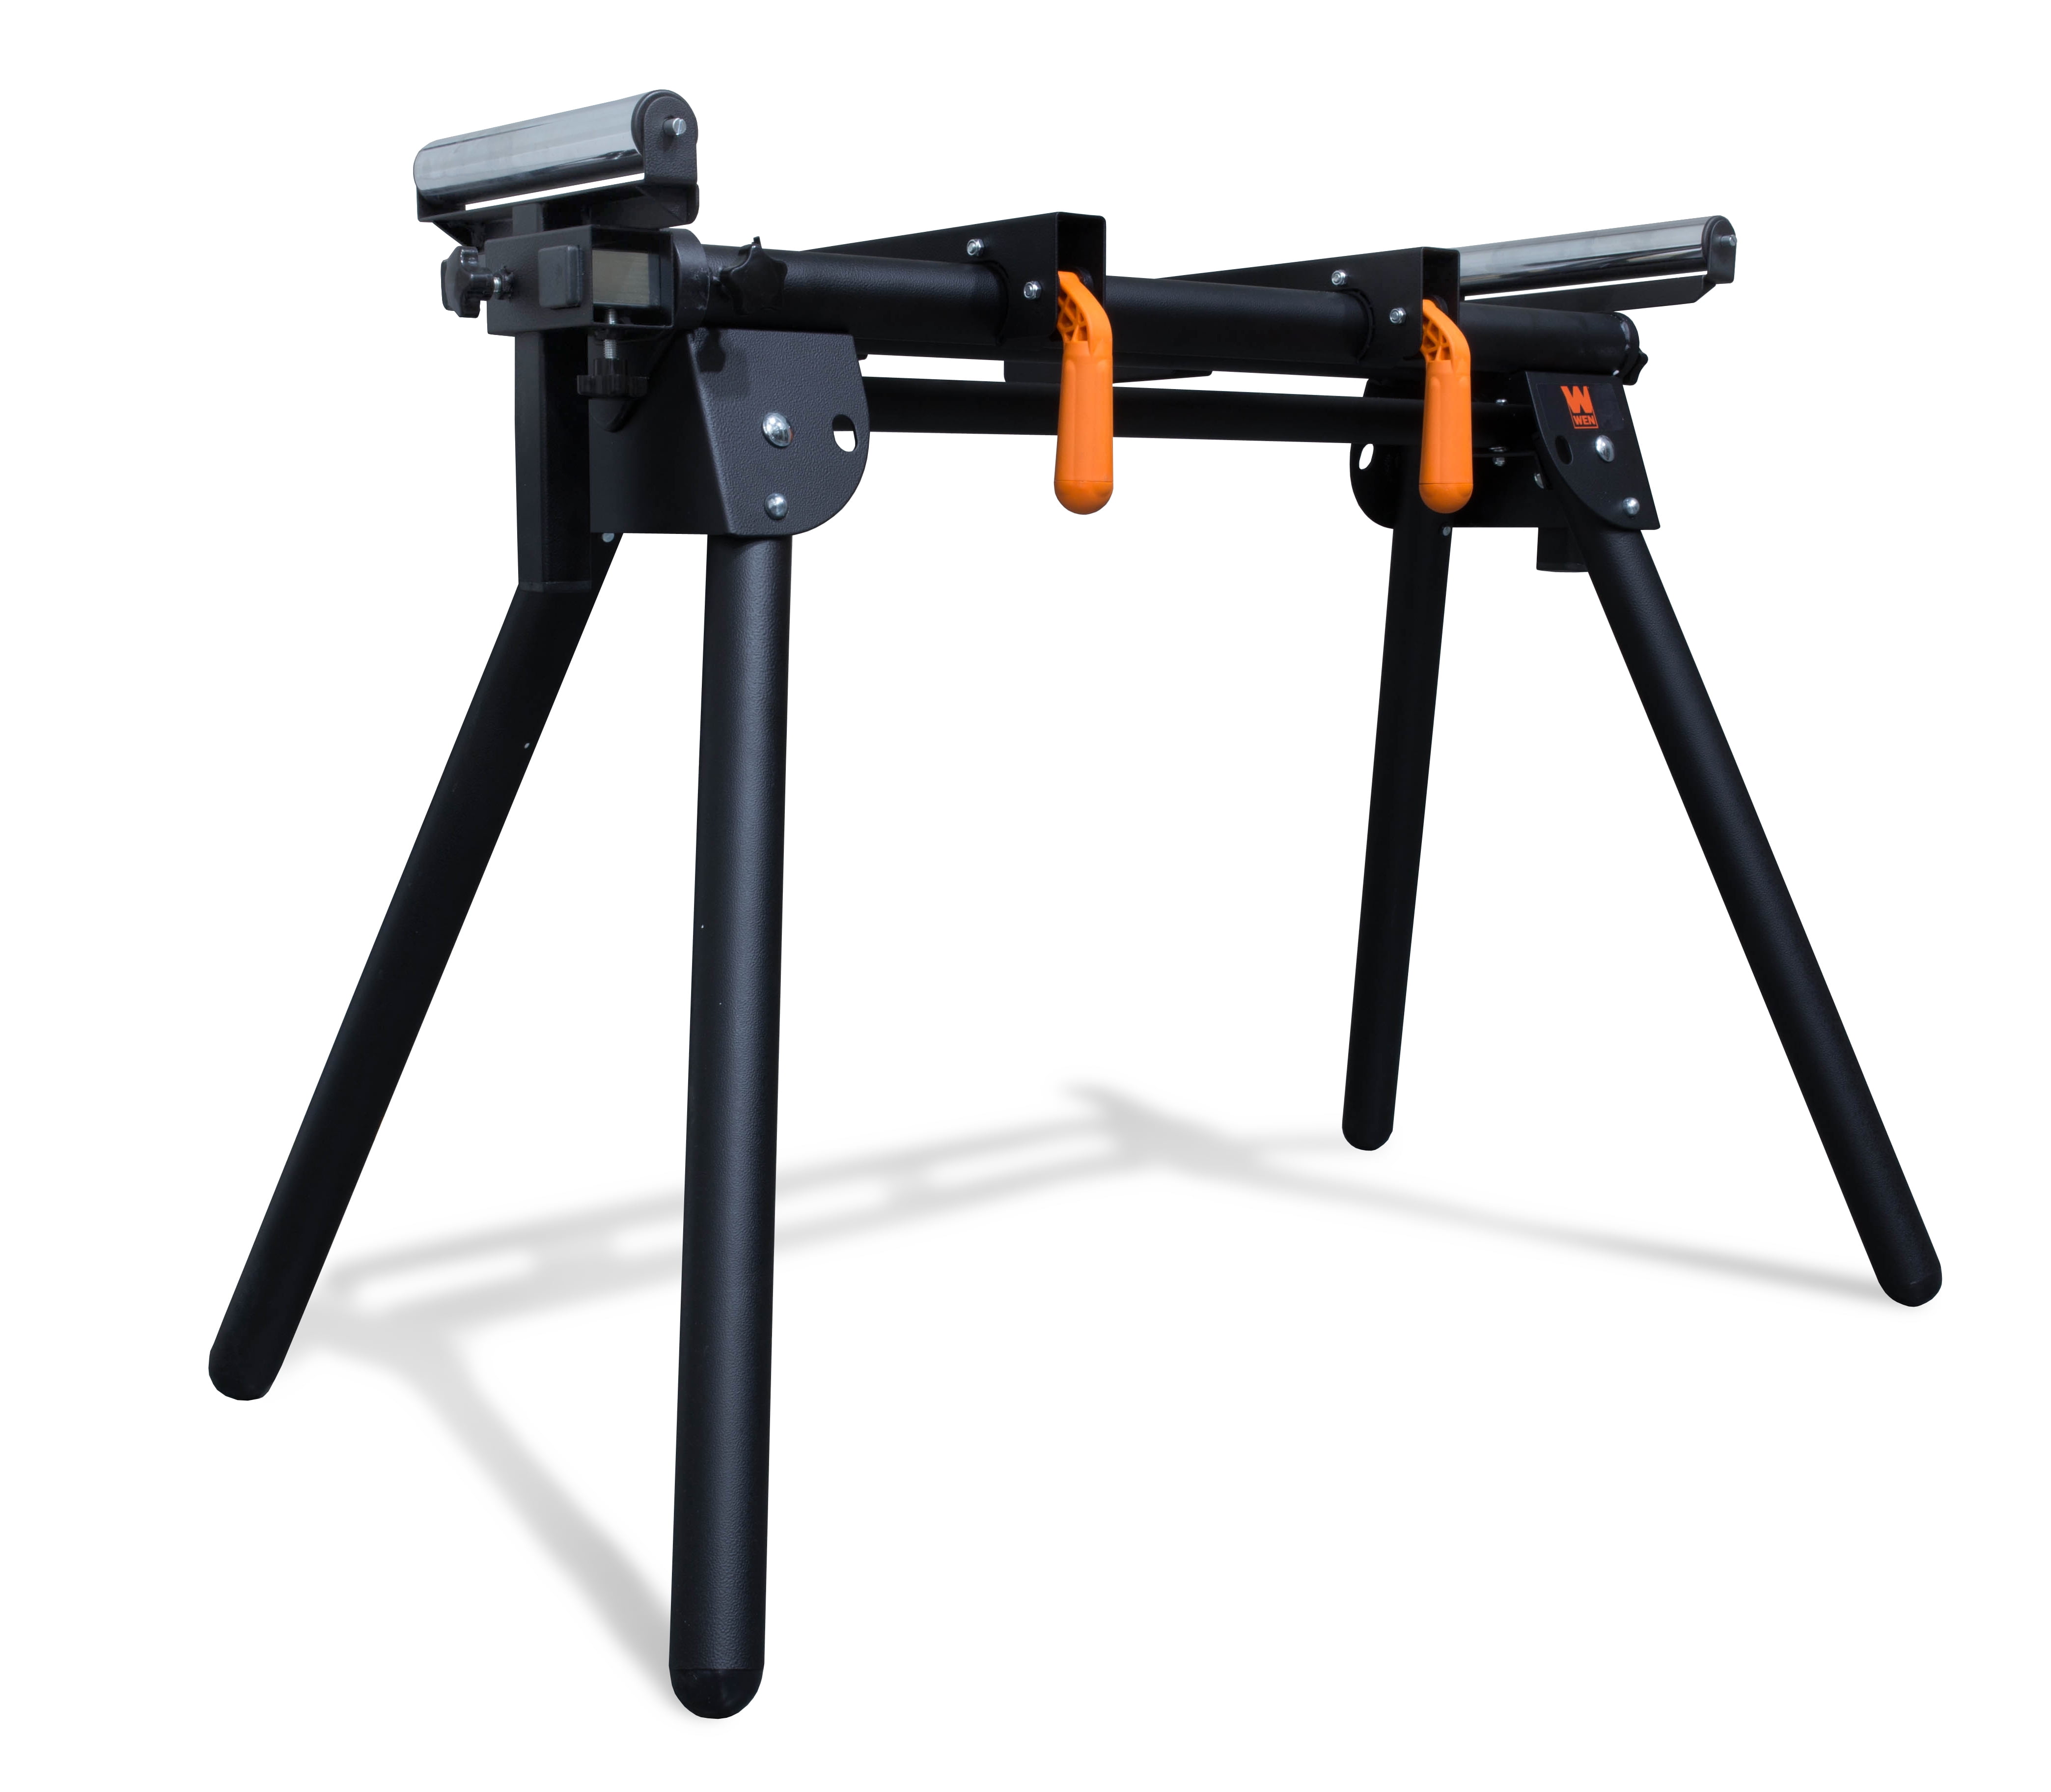 Details about   Frontier Miter Saw Stand Adjustable Legs Universal Mount Brackets Locking Levers 